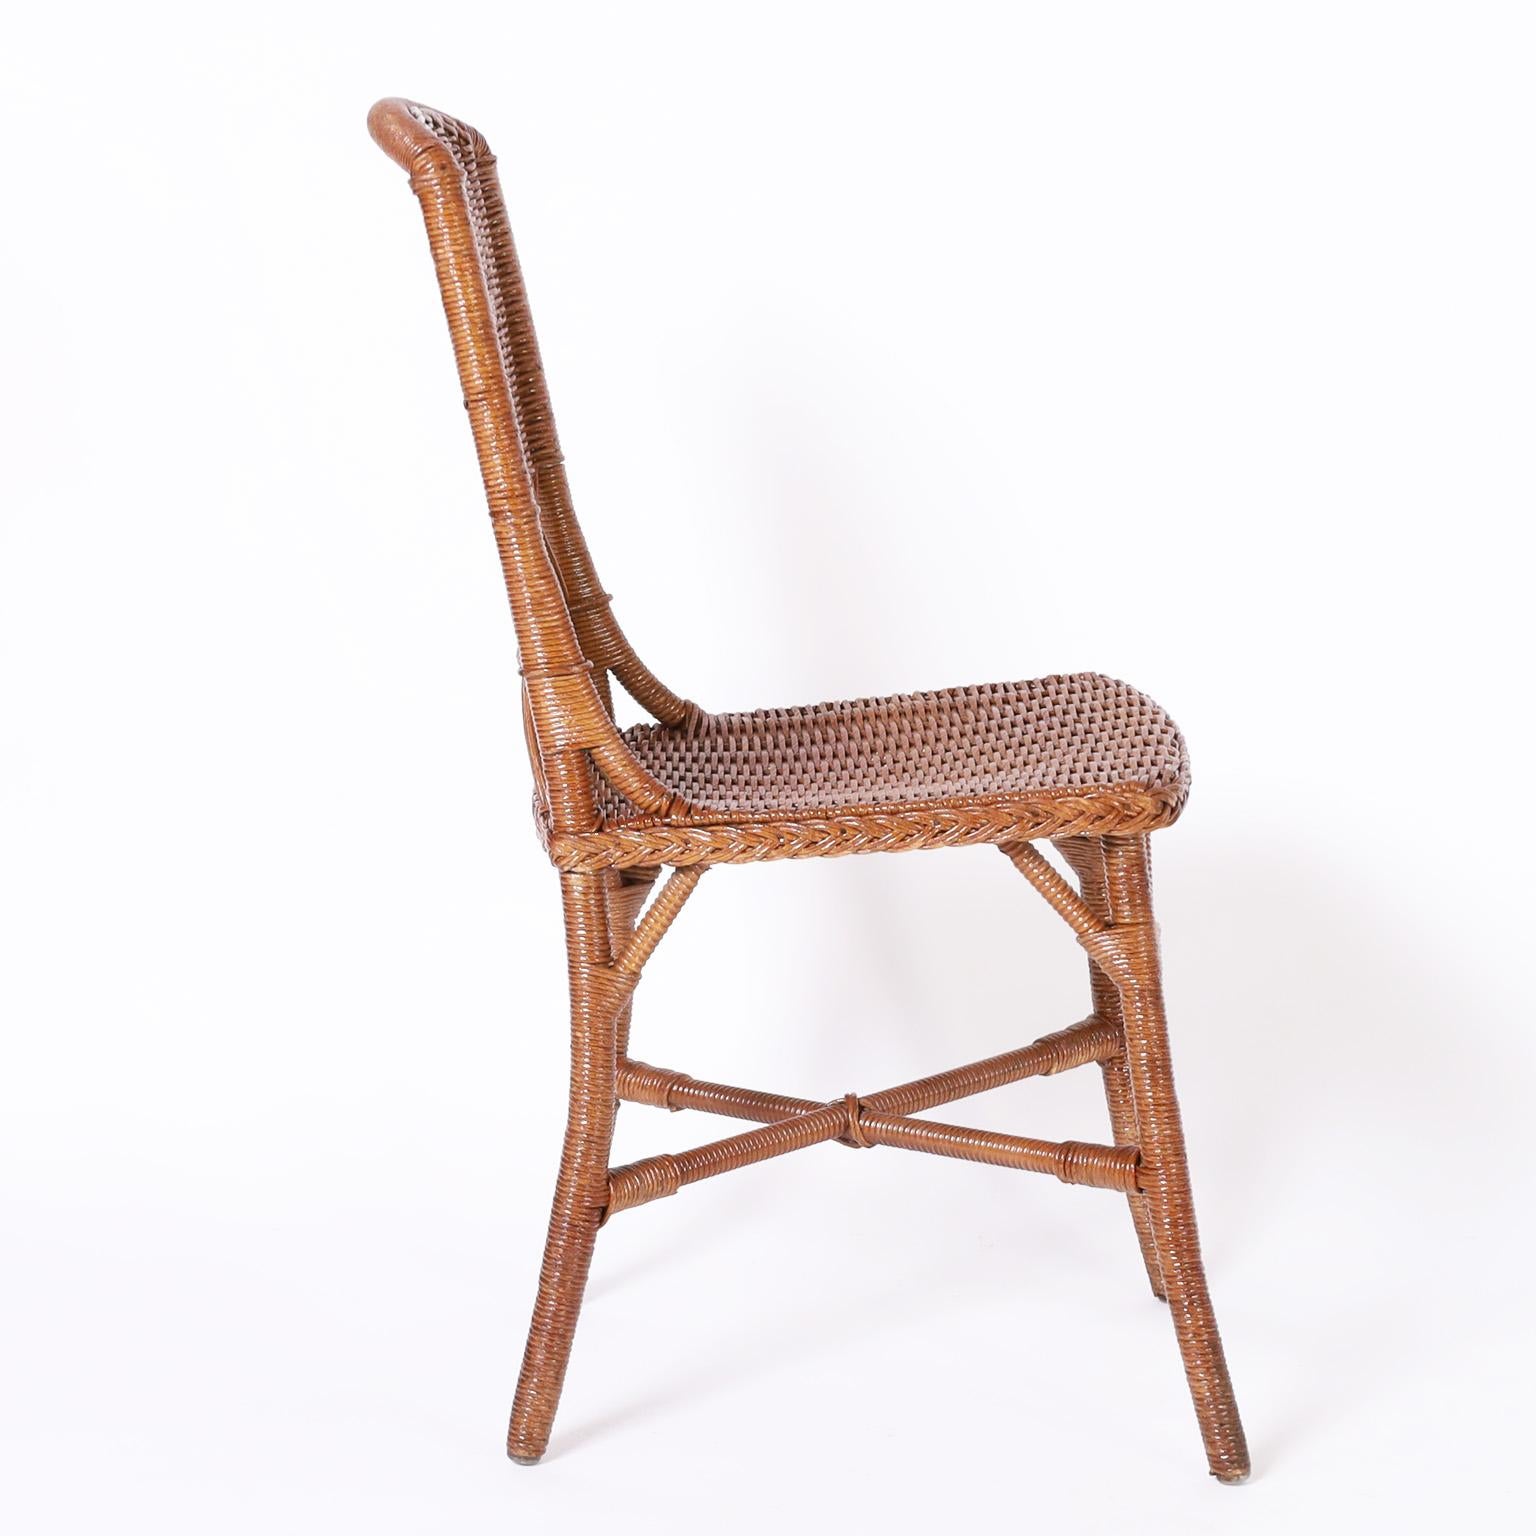 Standout set of eight wicker side chairs in remarkable condition with multiple weaving techniques, crafted with brackets and cross stretchers for durability. Originally called fiber furniture in the 1937 catalog signed Sheboygan Furniture Co. on the